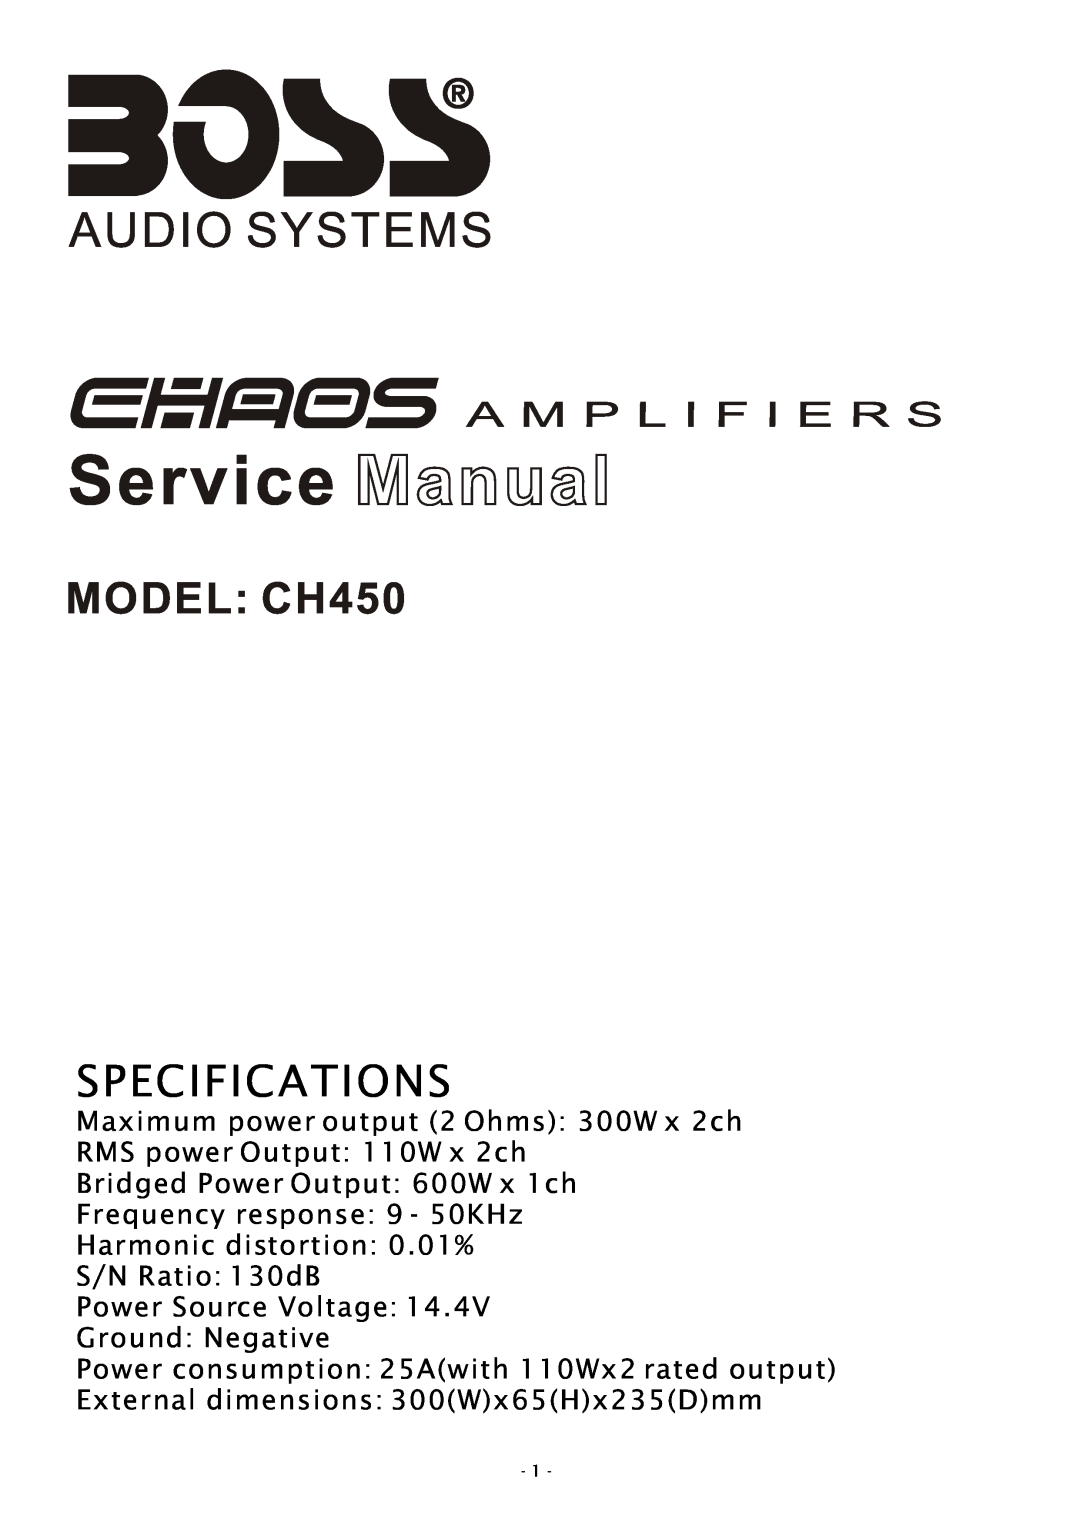 Boss Audio Systems specifications MODEL CH450, Specifications, External dimensions 300Wx65Hx235Dmm 